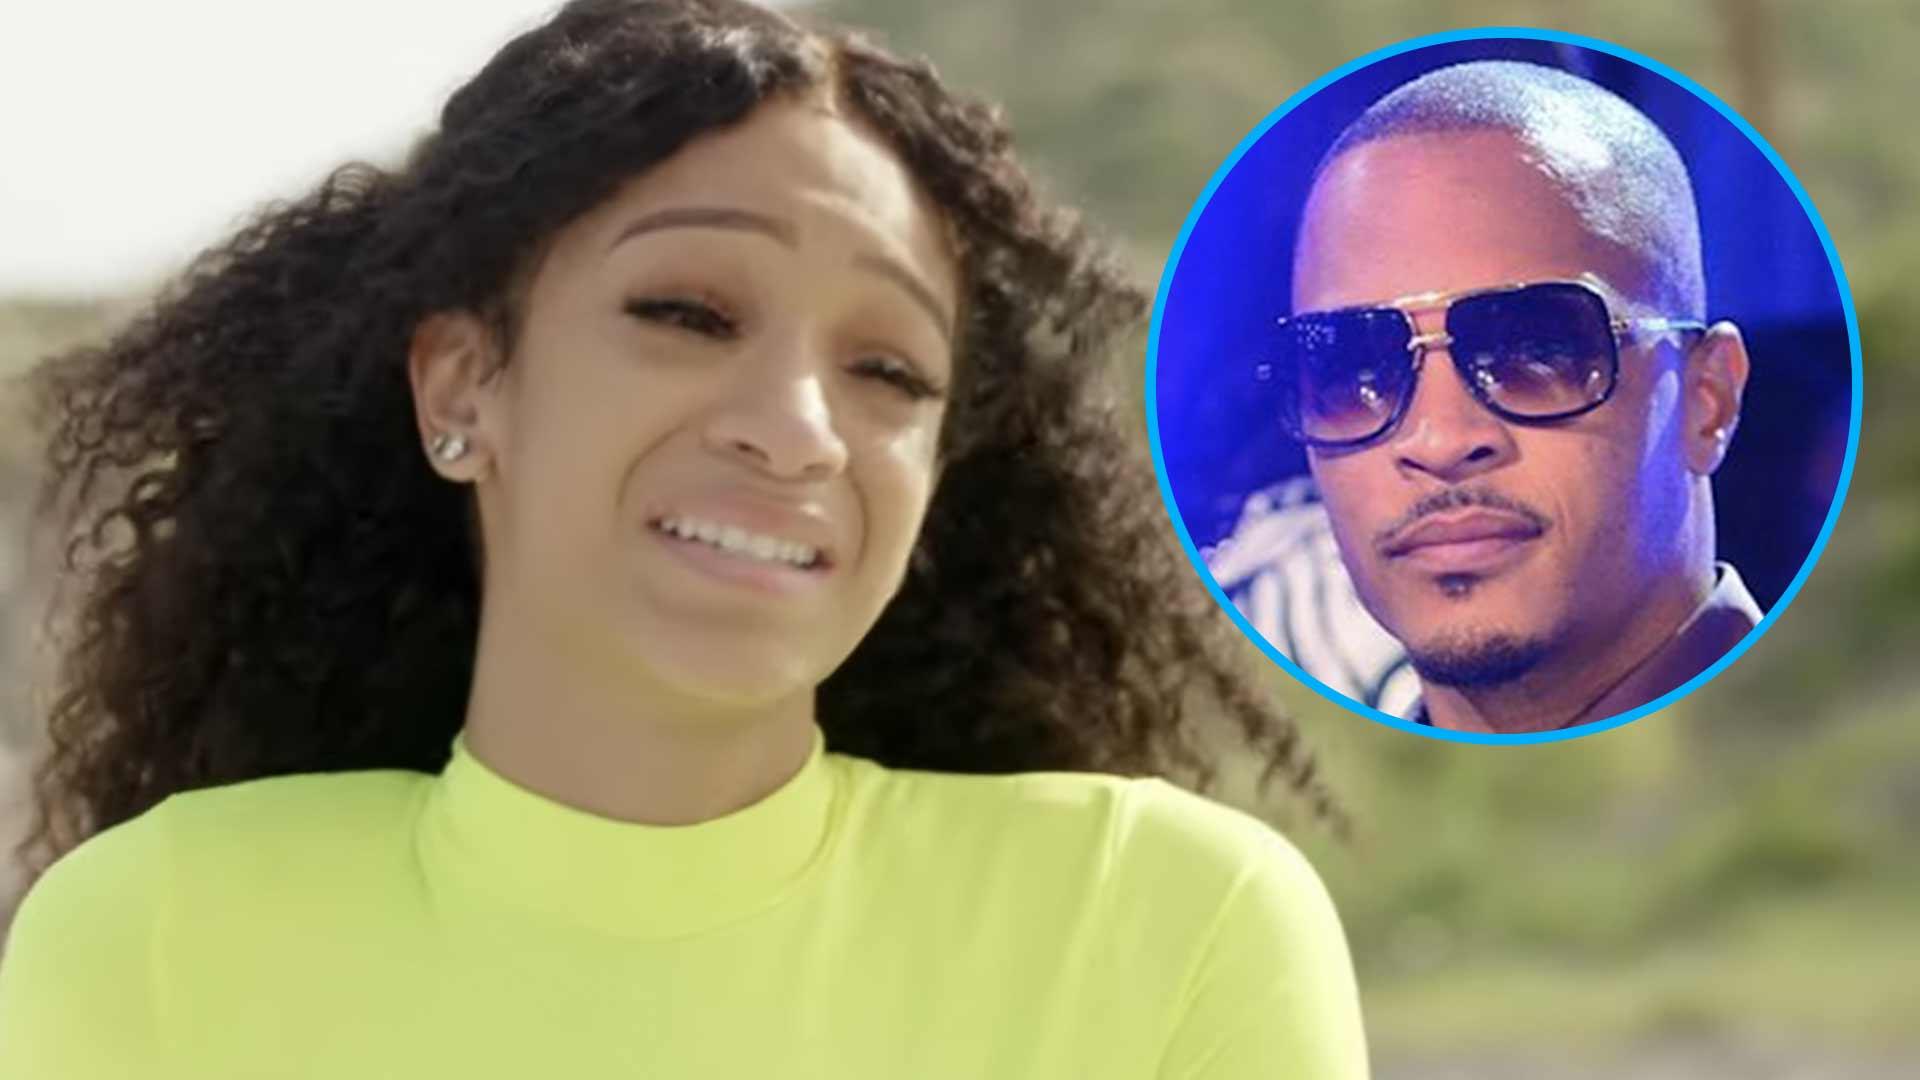 T.I.’s Daughter Breaks Down Crying Over Dad’s ‘Hymen’ Comments